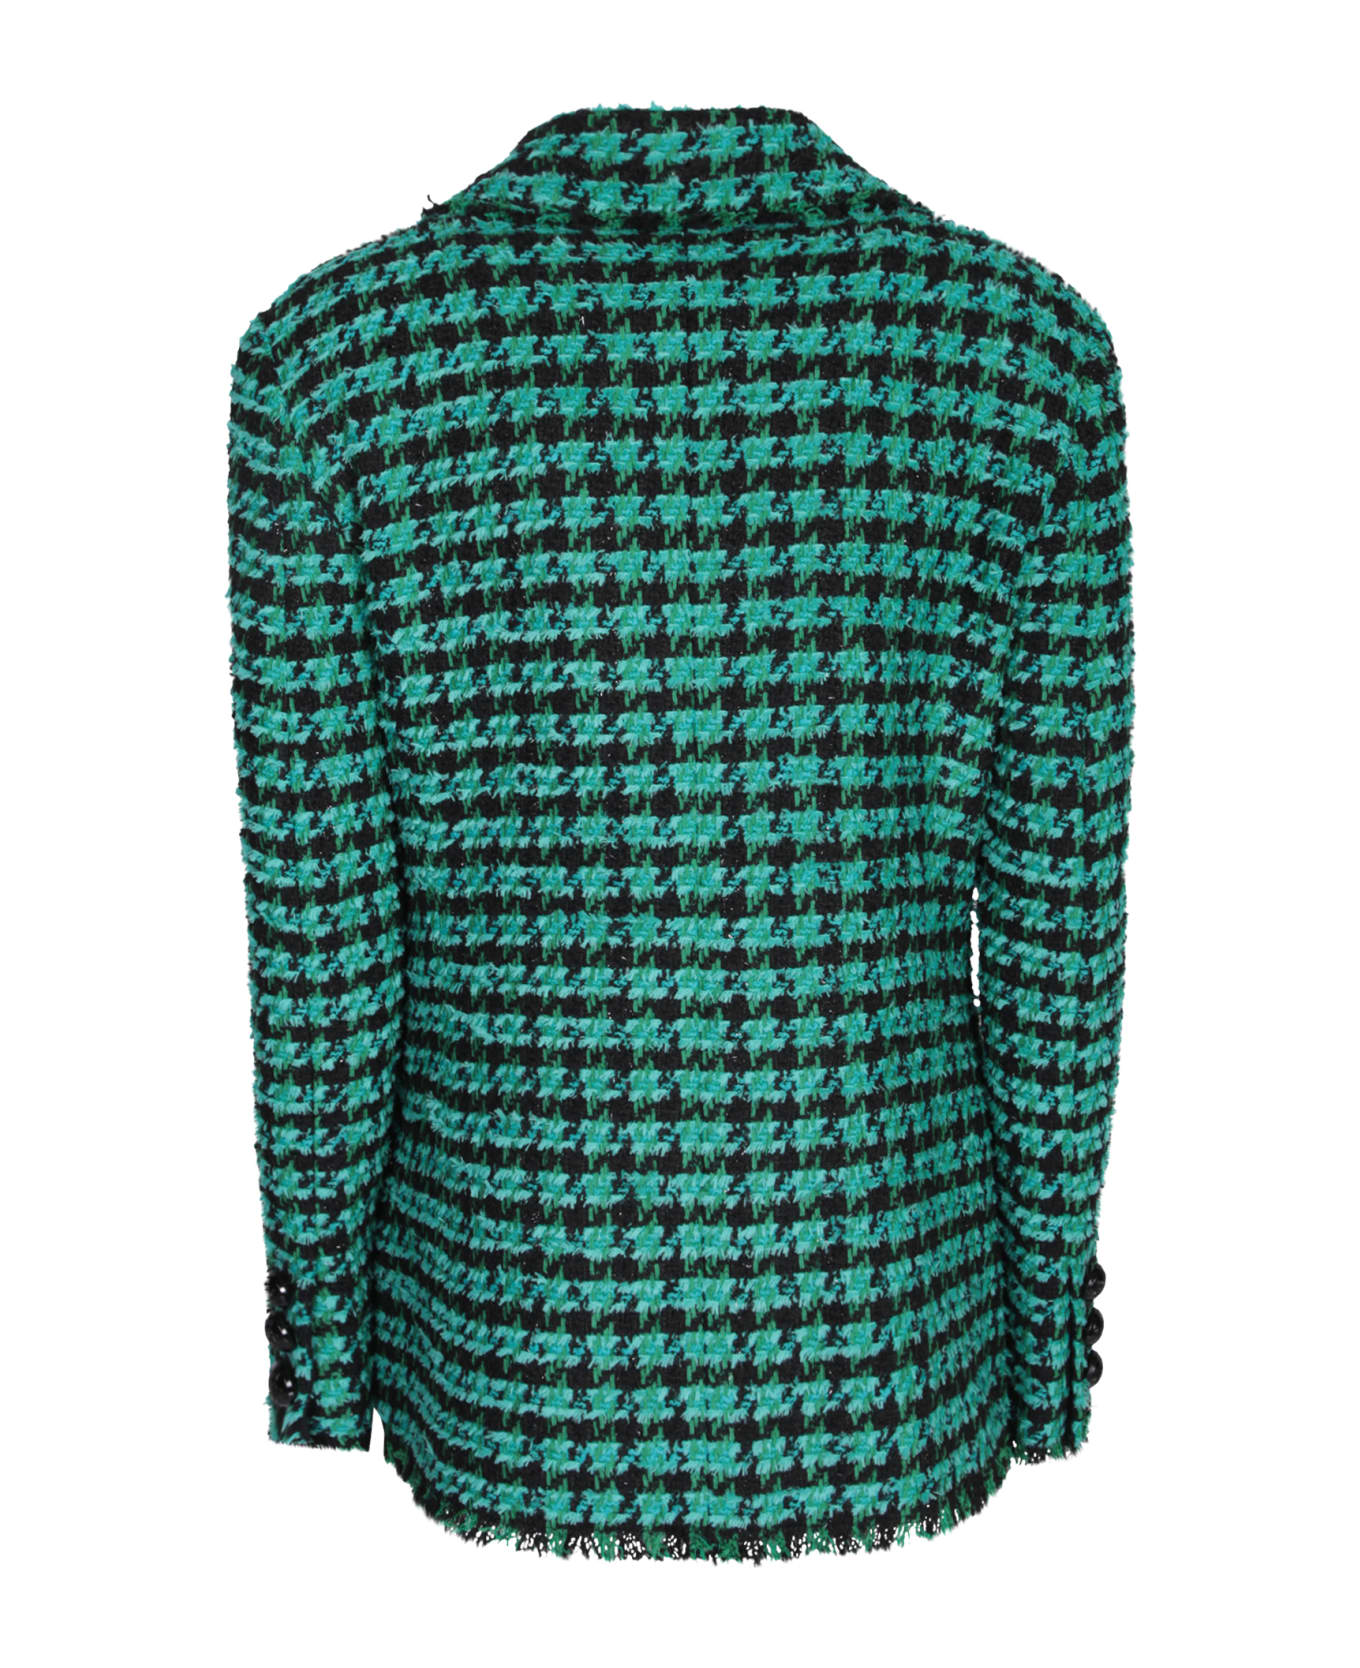 MSGM Double-breasted Blazer - Green ブレザー